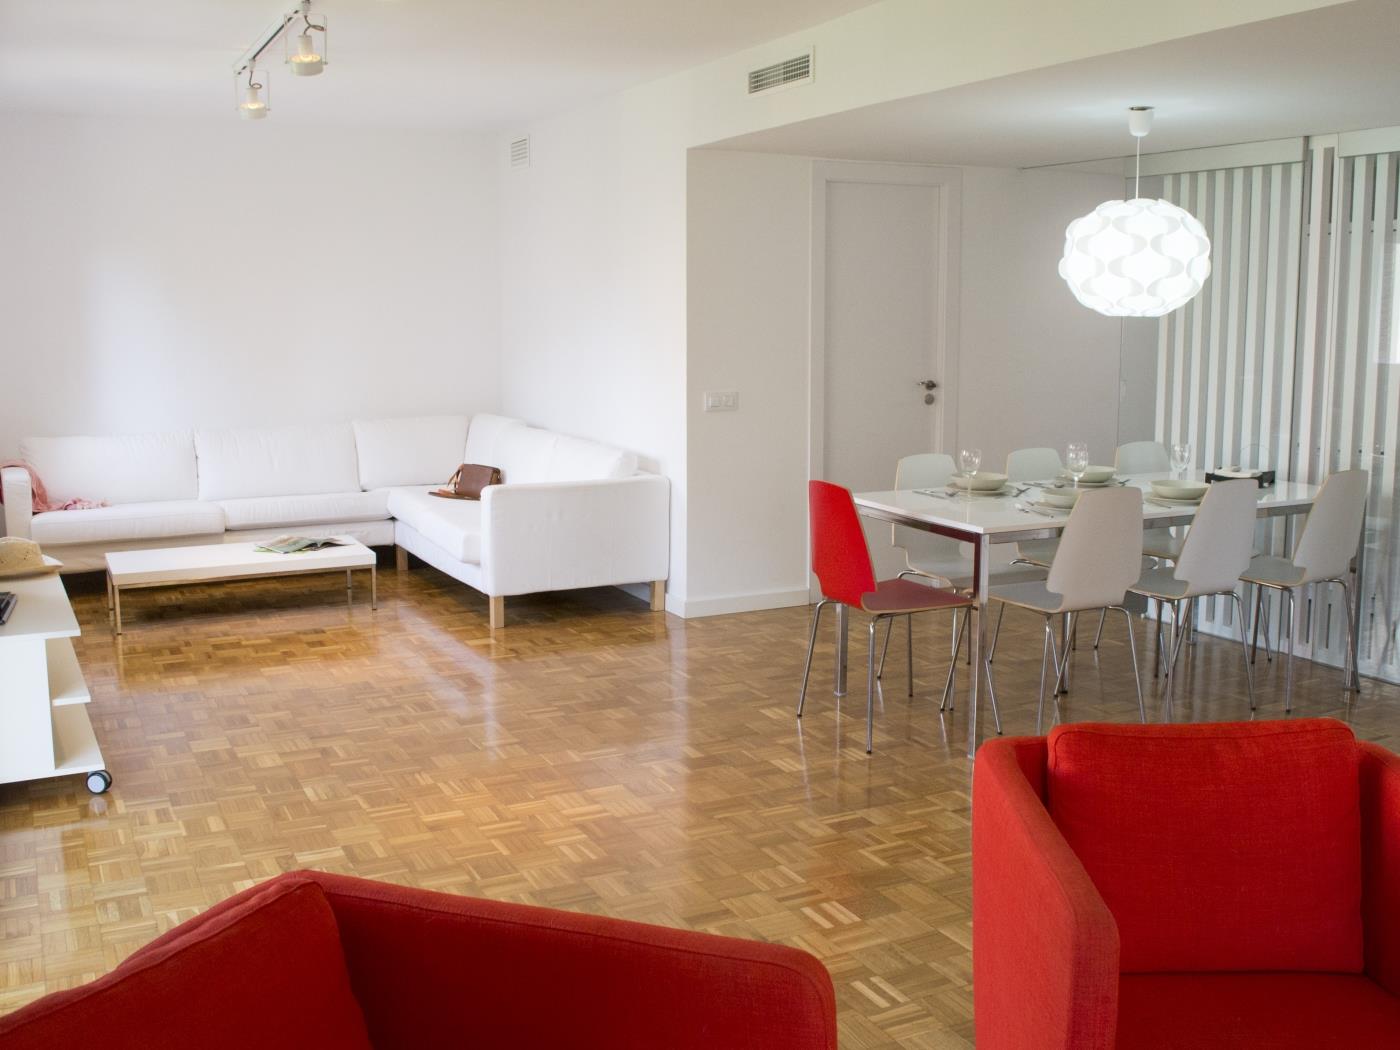 Come and enjoy our newly refurbished flat! - My Space Barcelona Apartments